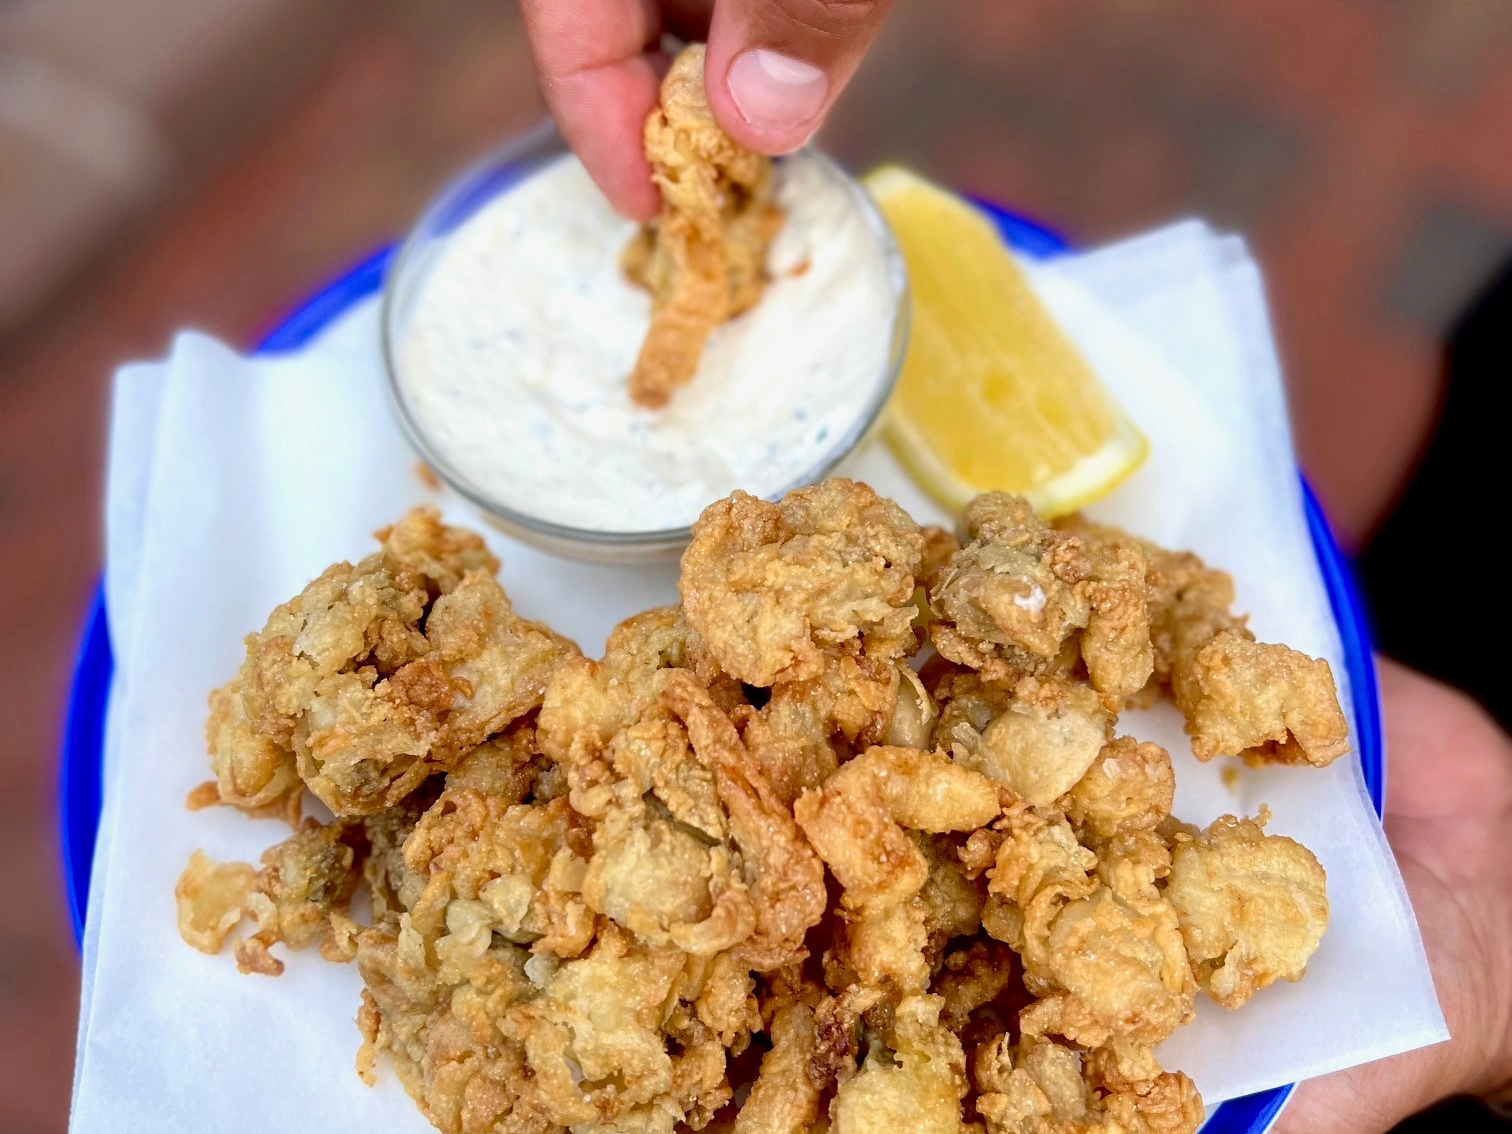 A hand dips a fried clam into a cup of tartar sauce, surrounded by more pieces of fried clam and a lemon wedge.